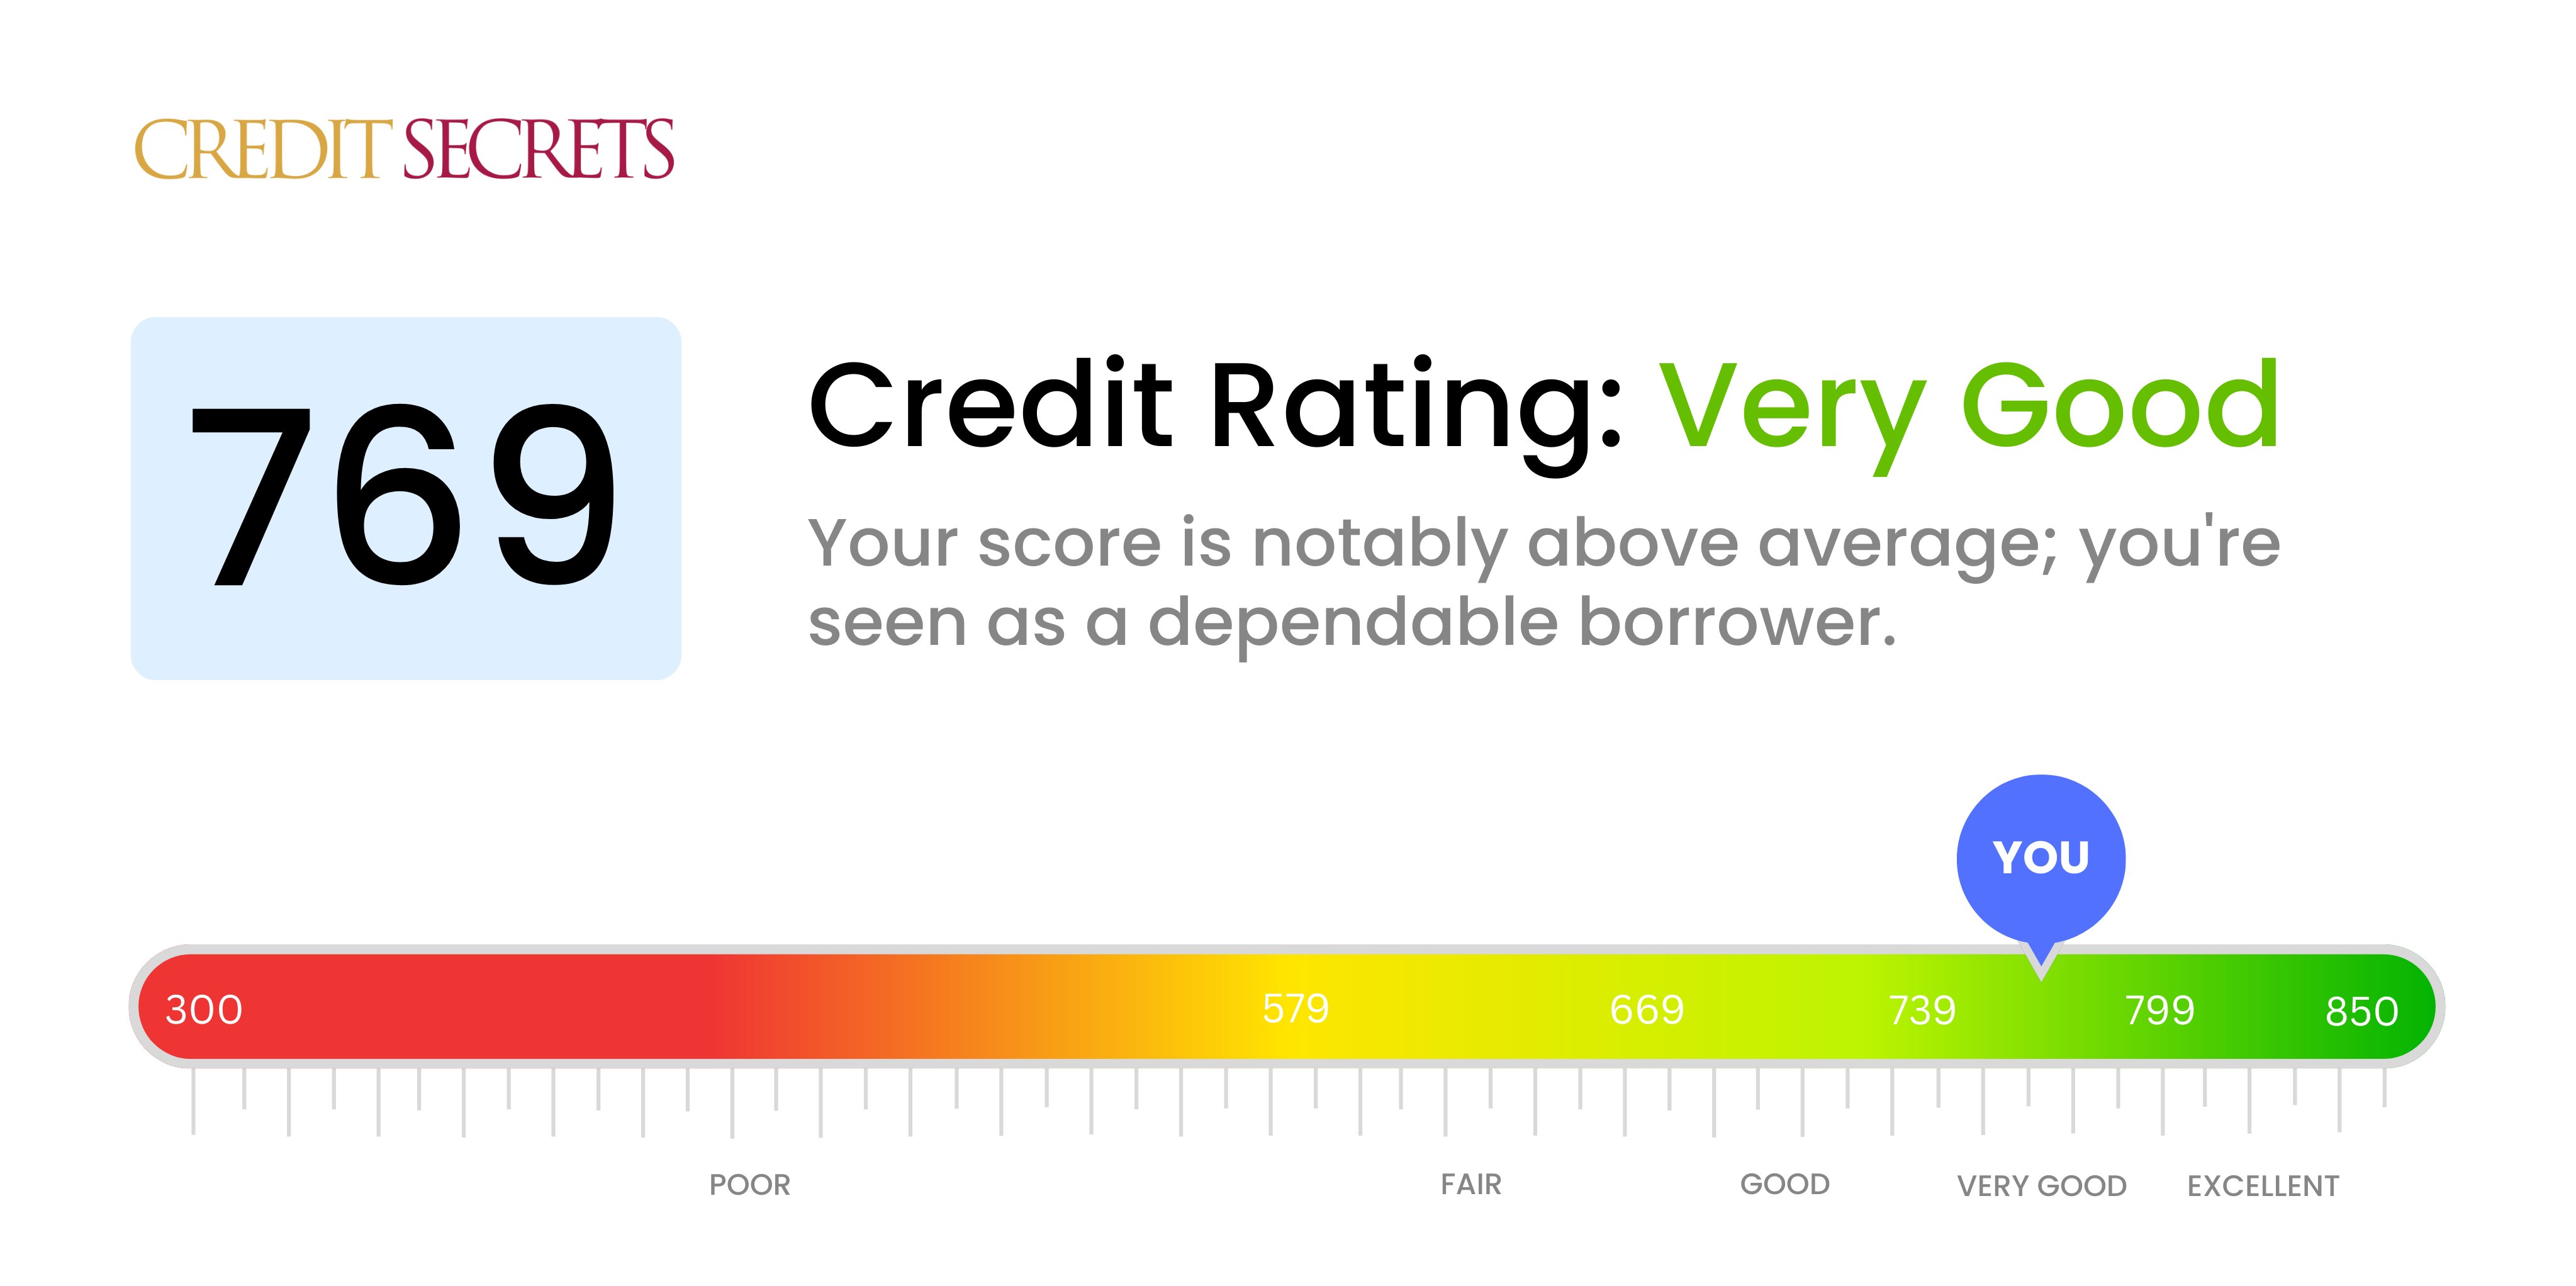 Is 769 a good credit score?